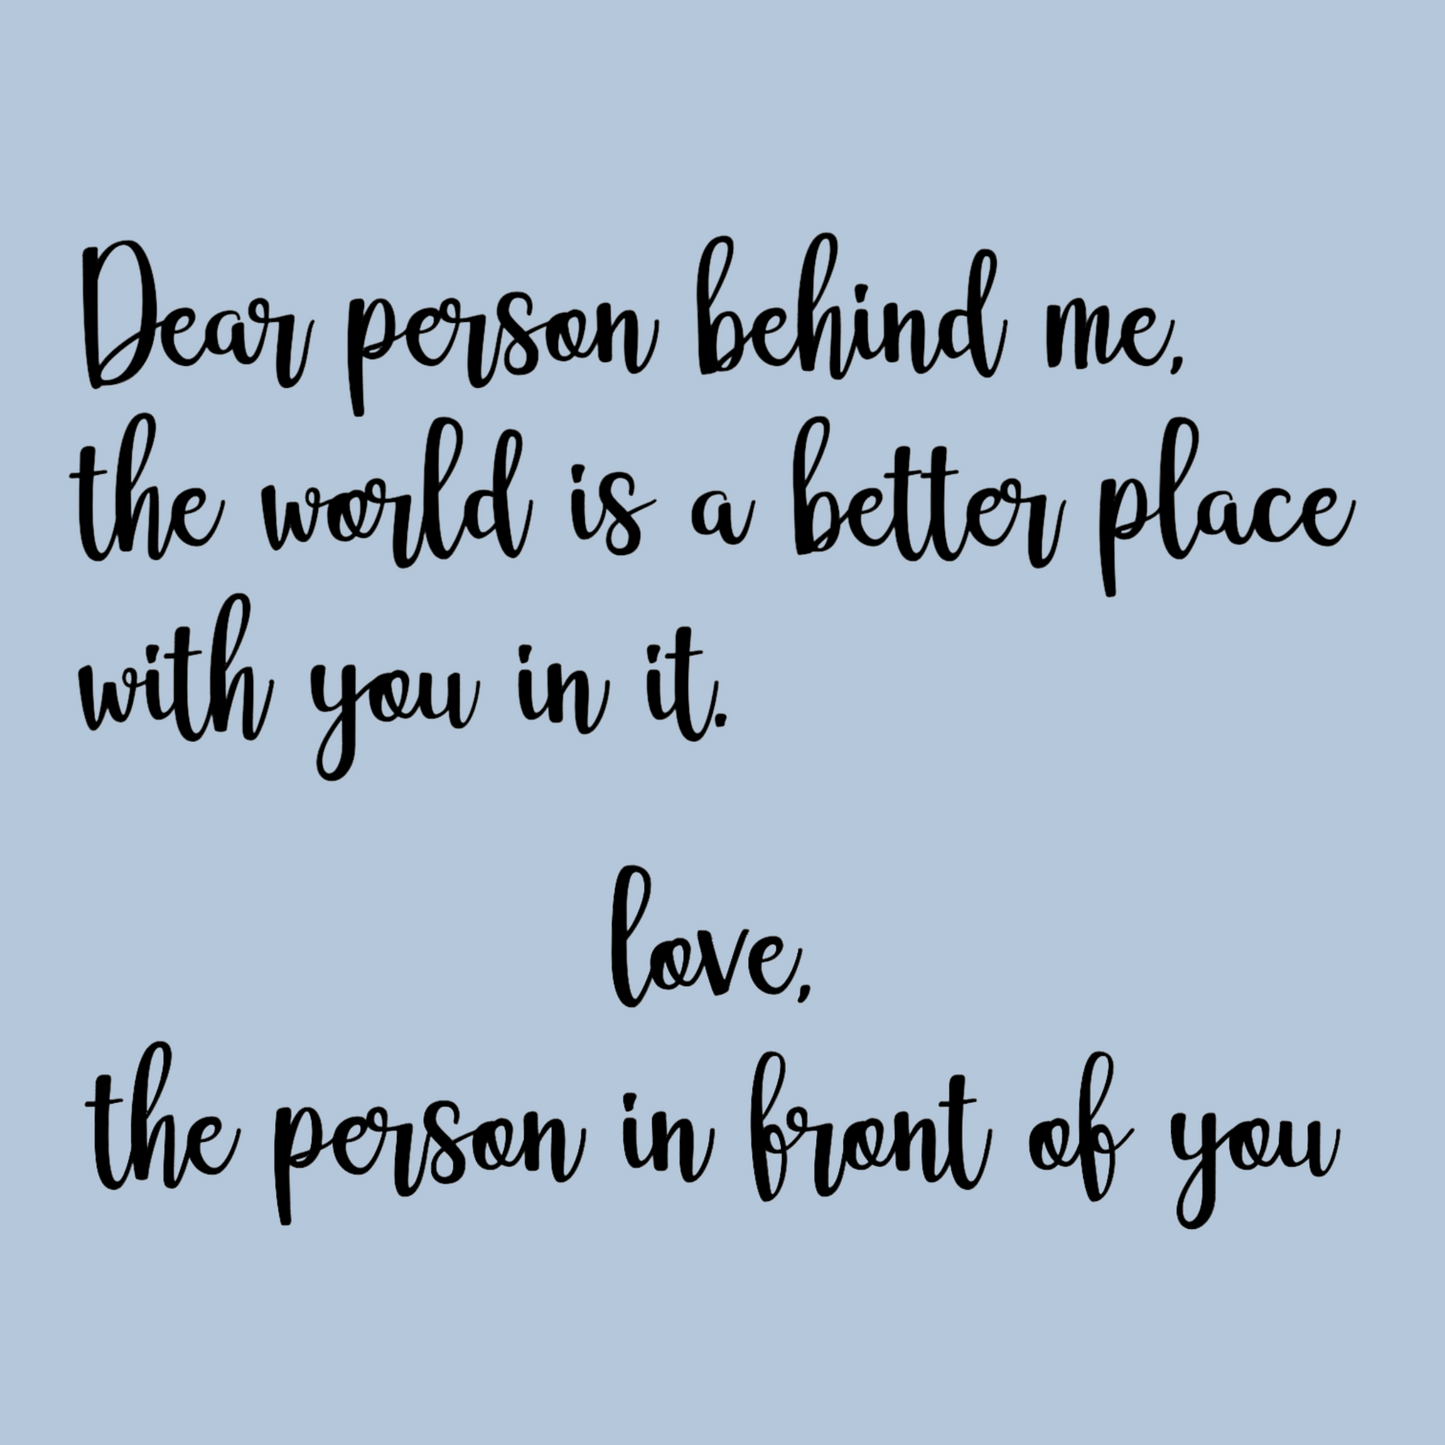 This is the back view of the sweatshirt design / up close view. The design says "dear person behind me, the world is a better place with you in it. Love the person in front of you." on a light blue background.